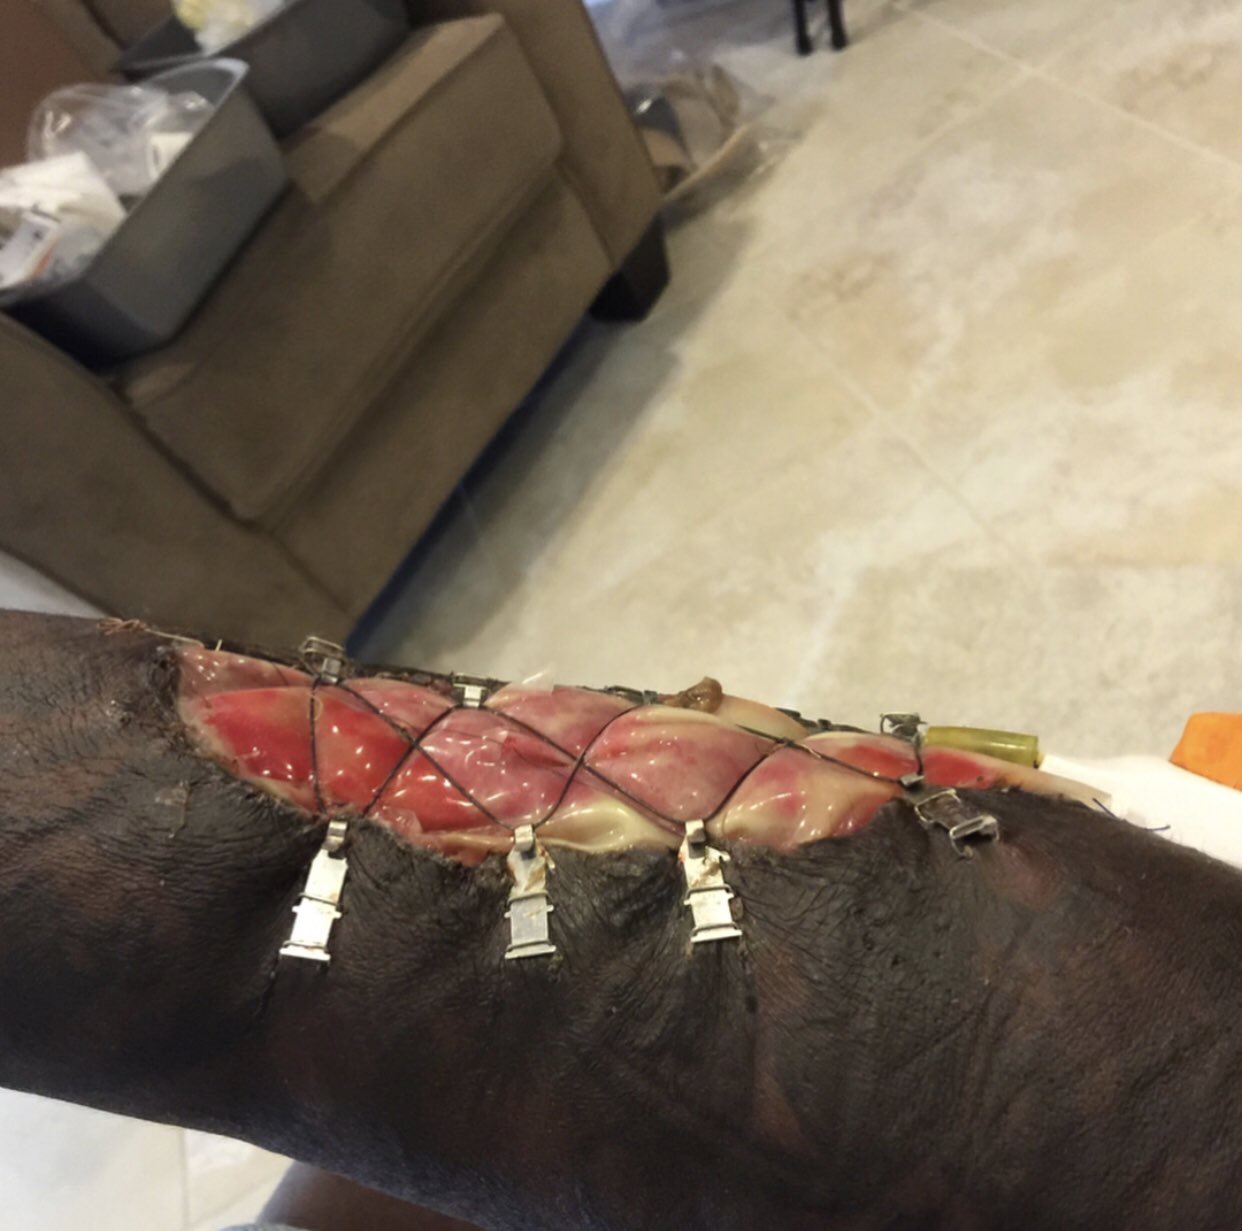 Jason Pierre-Paul Shares Extremely Graphic Images Of Mangled Hand As July 4th Warning ...